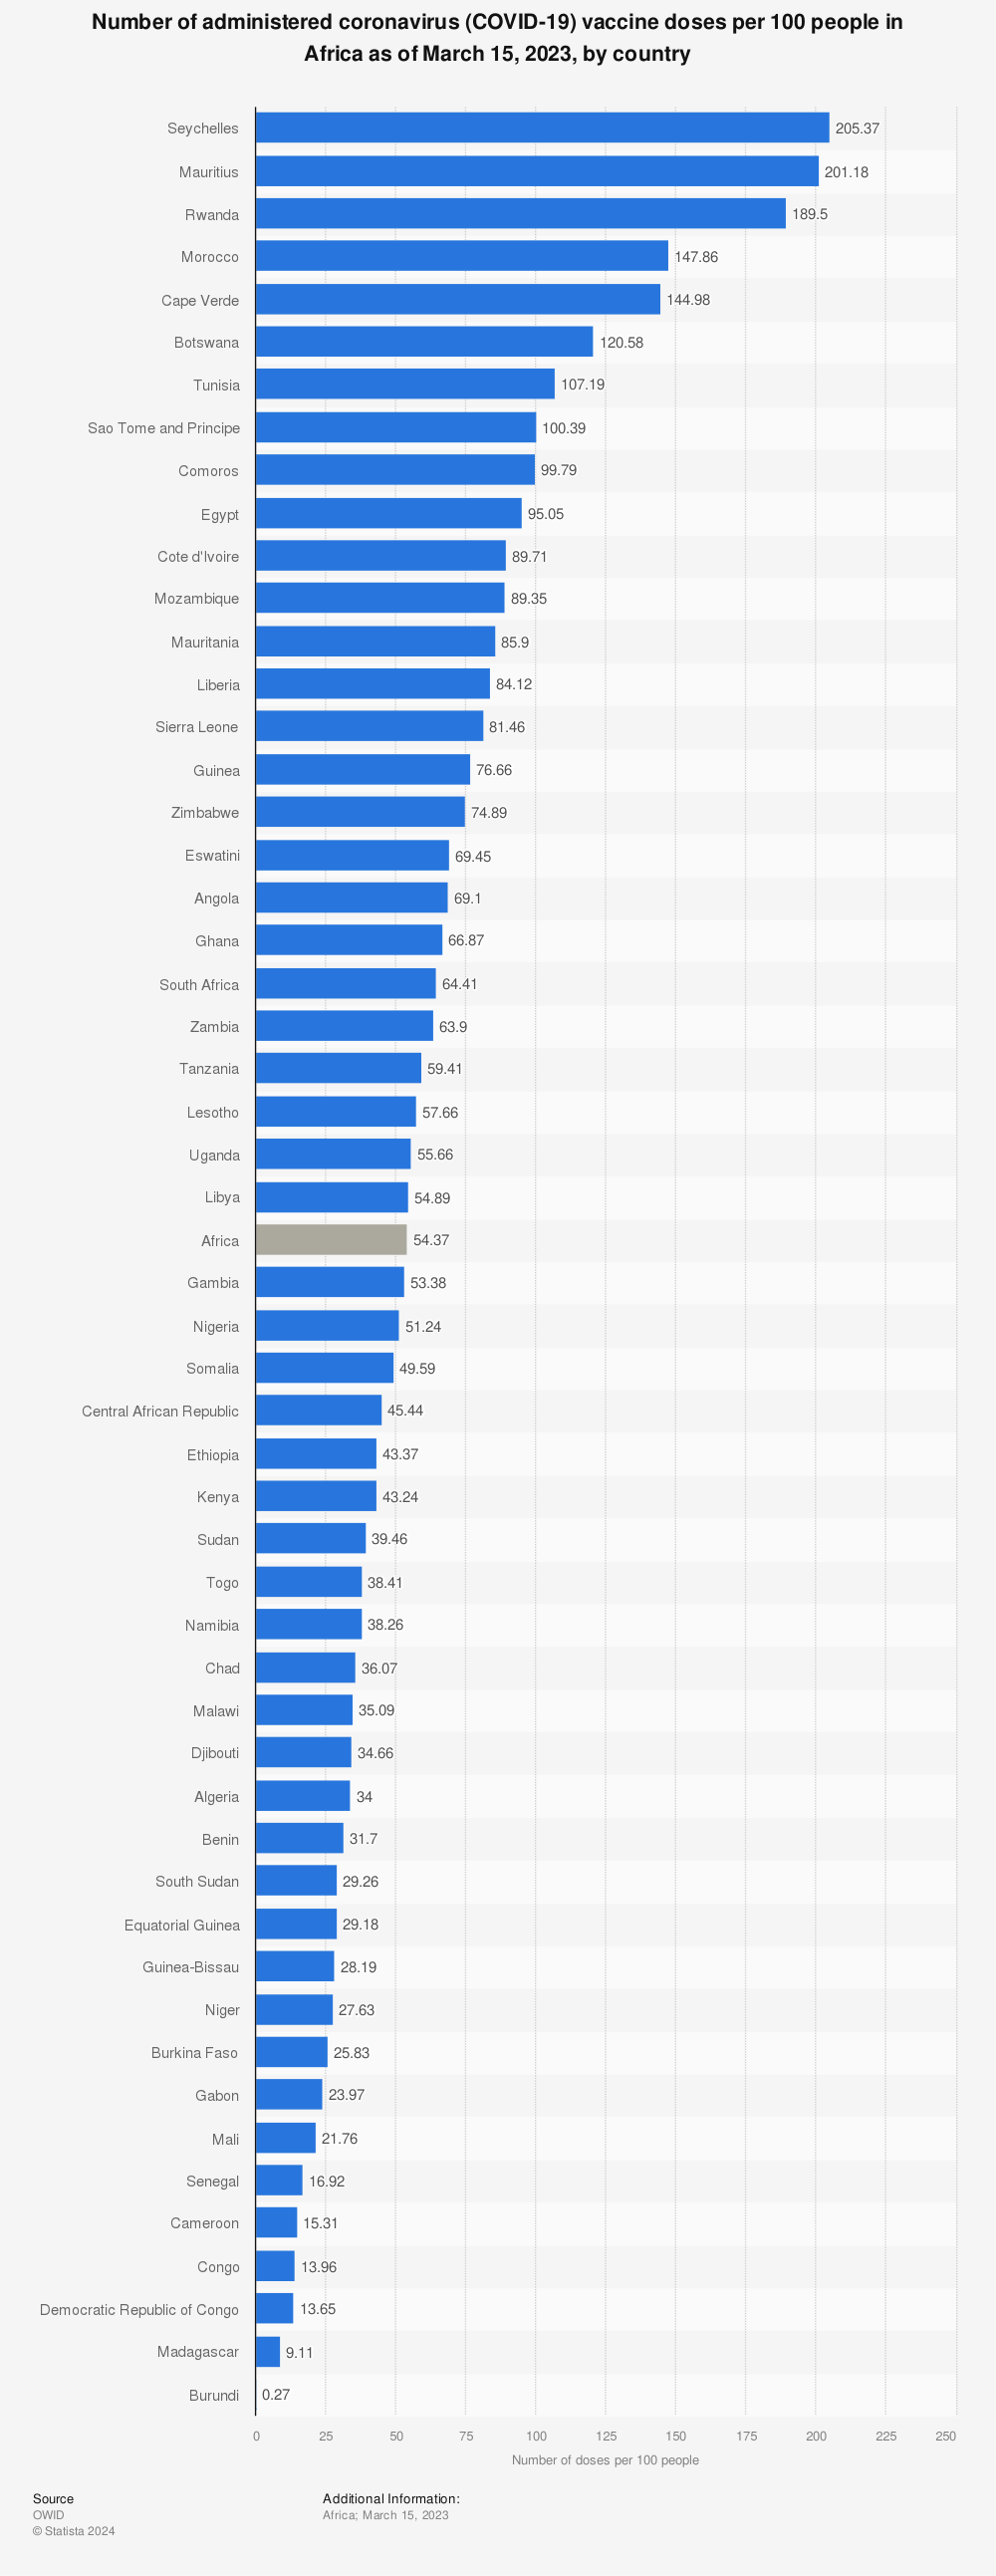 Statistic: Number of administered coronavirus (COVID-19) vaccine doses per 100 people in Africa as of January 9, 2022, by country | Statista